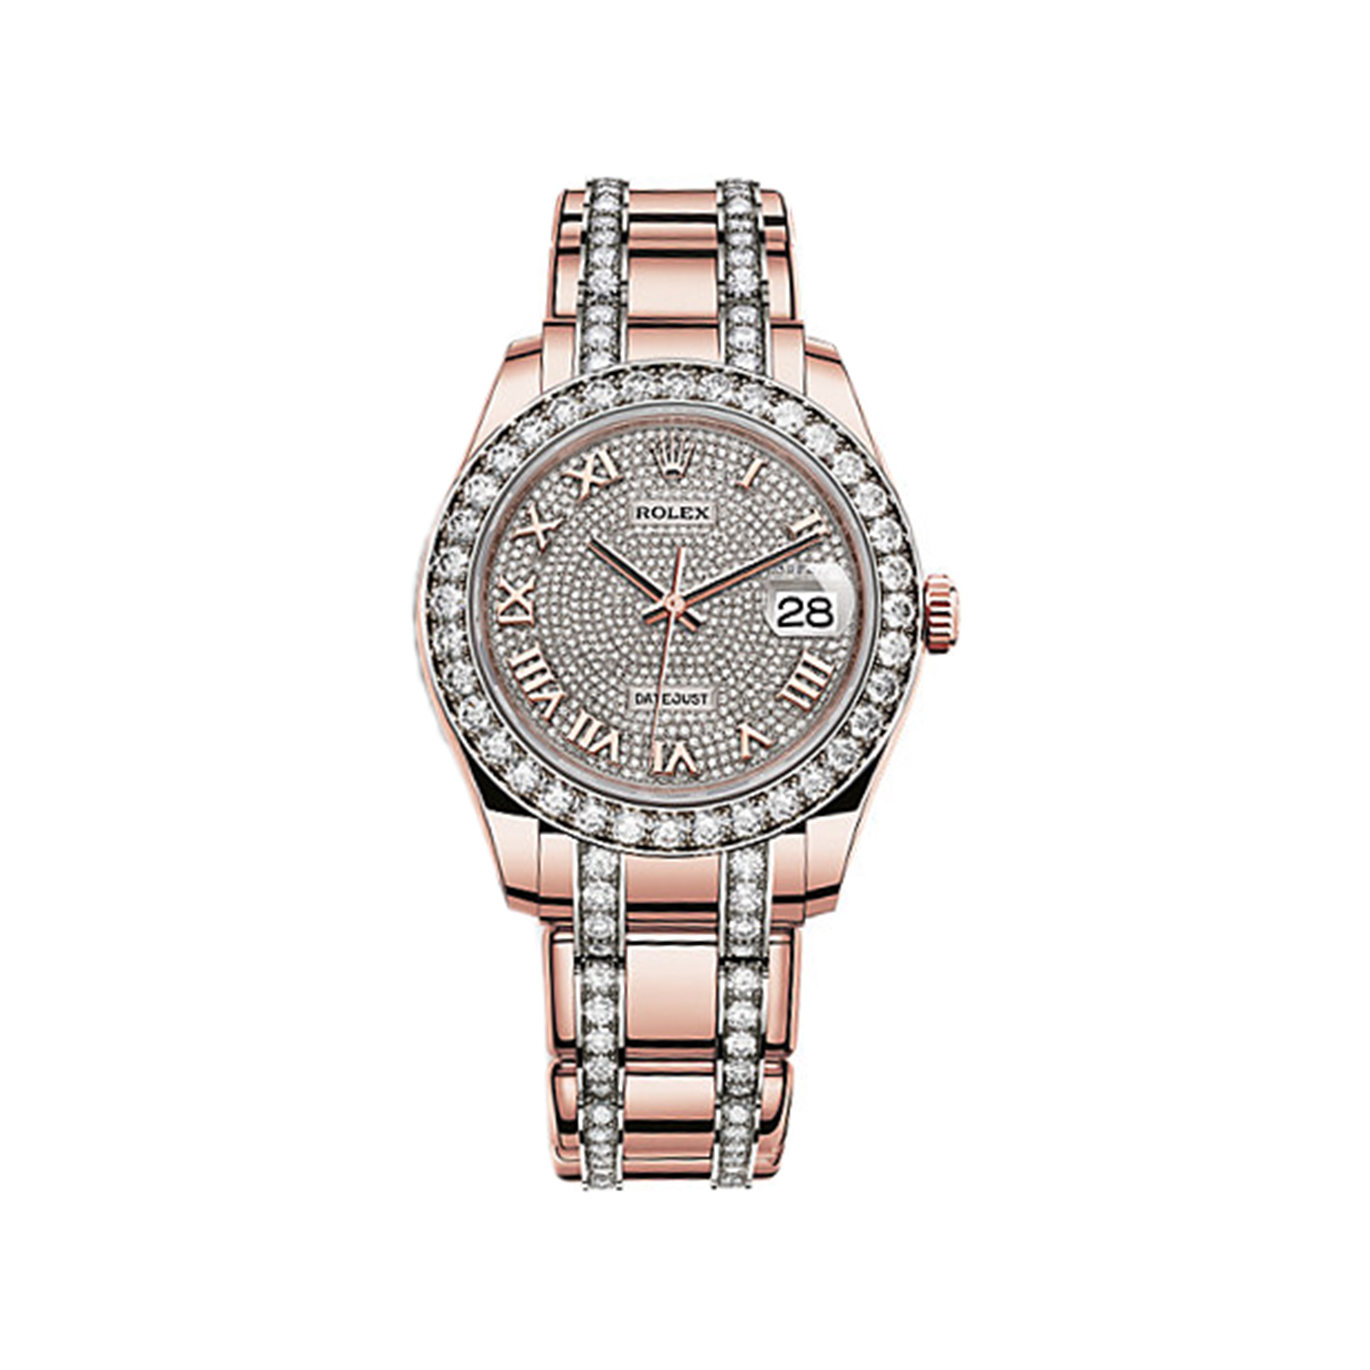 Pearlmaster 39 86285 Rose Gold & Diamonds Watch (18 ct Gold Paved With 713 Diamonds)